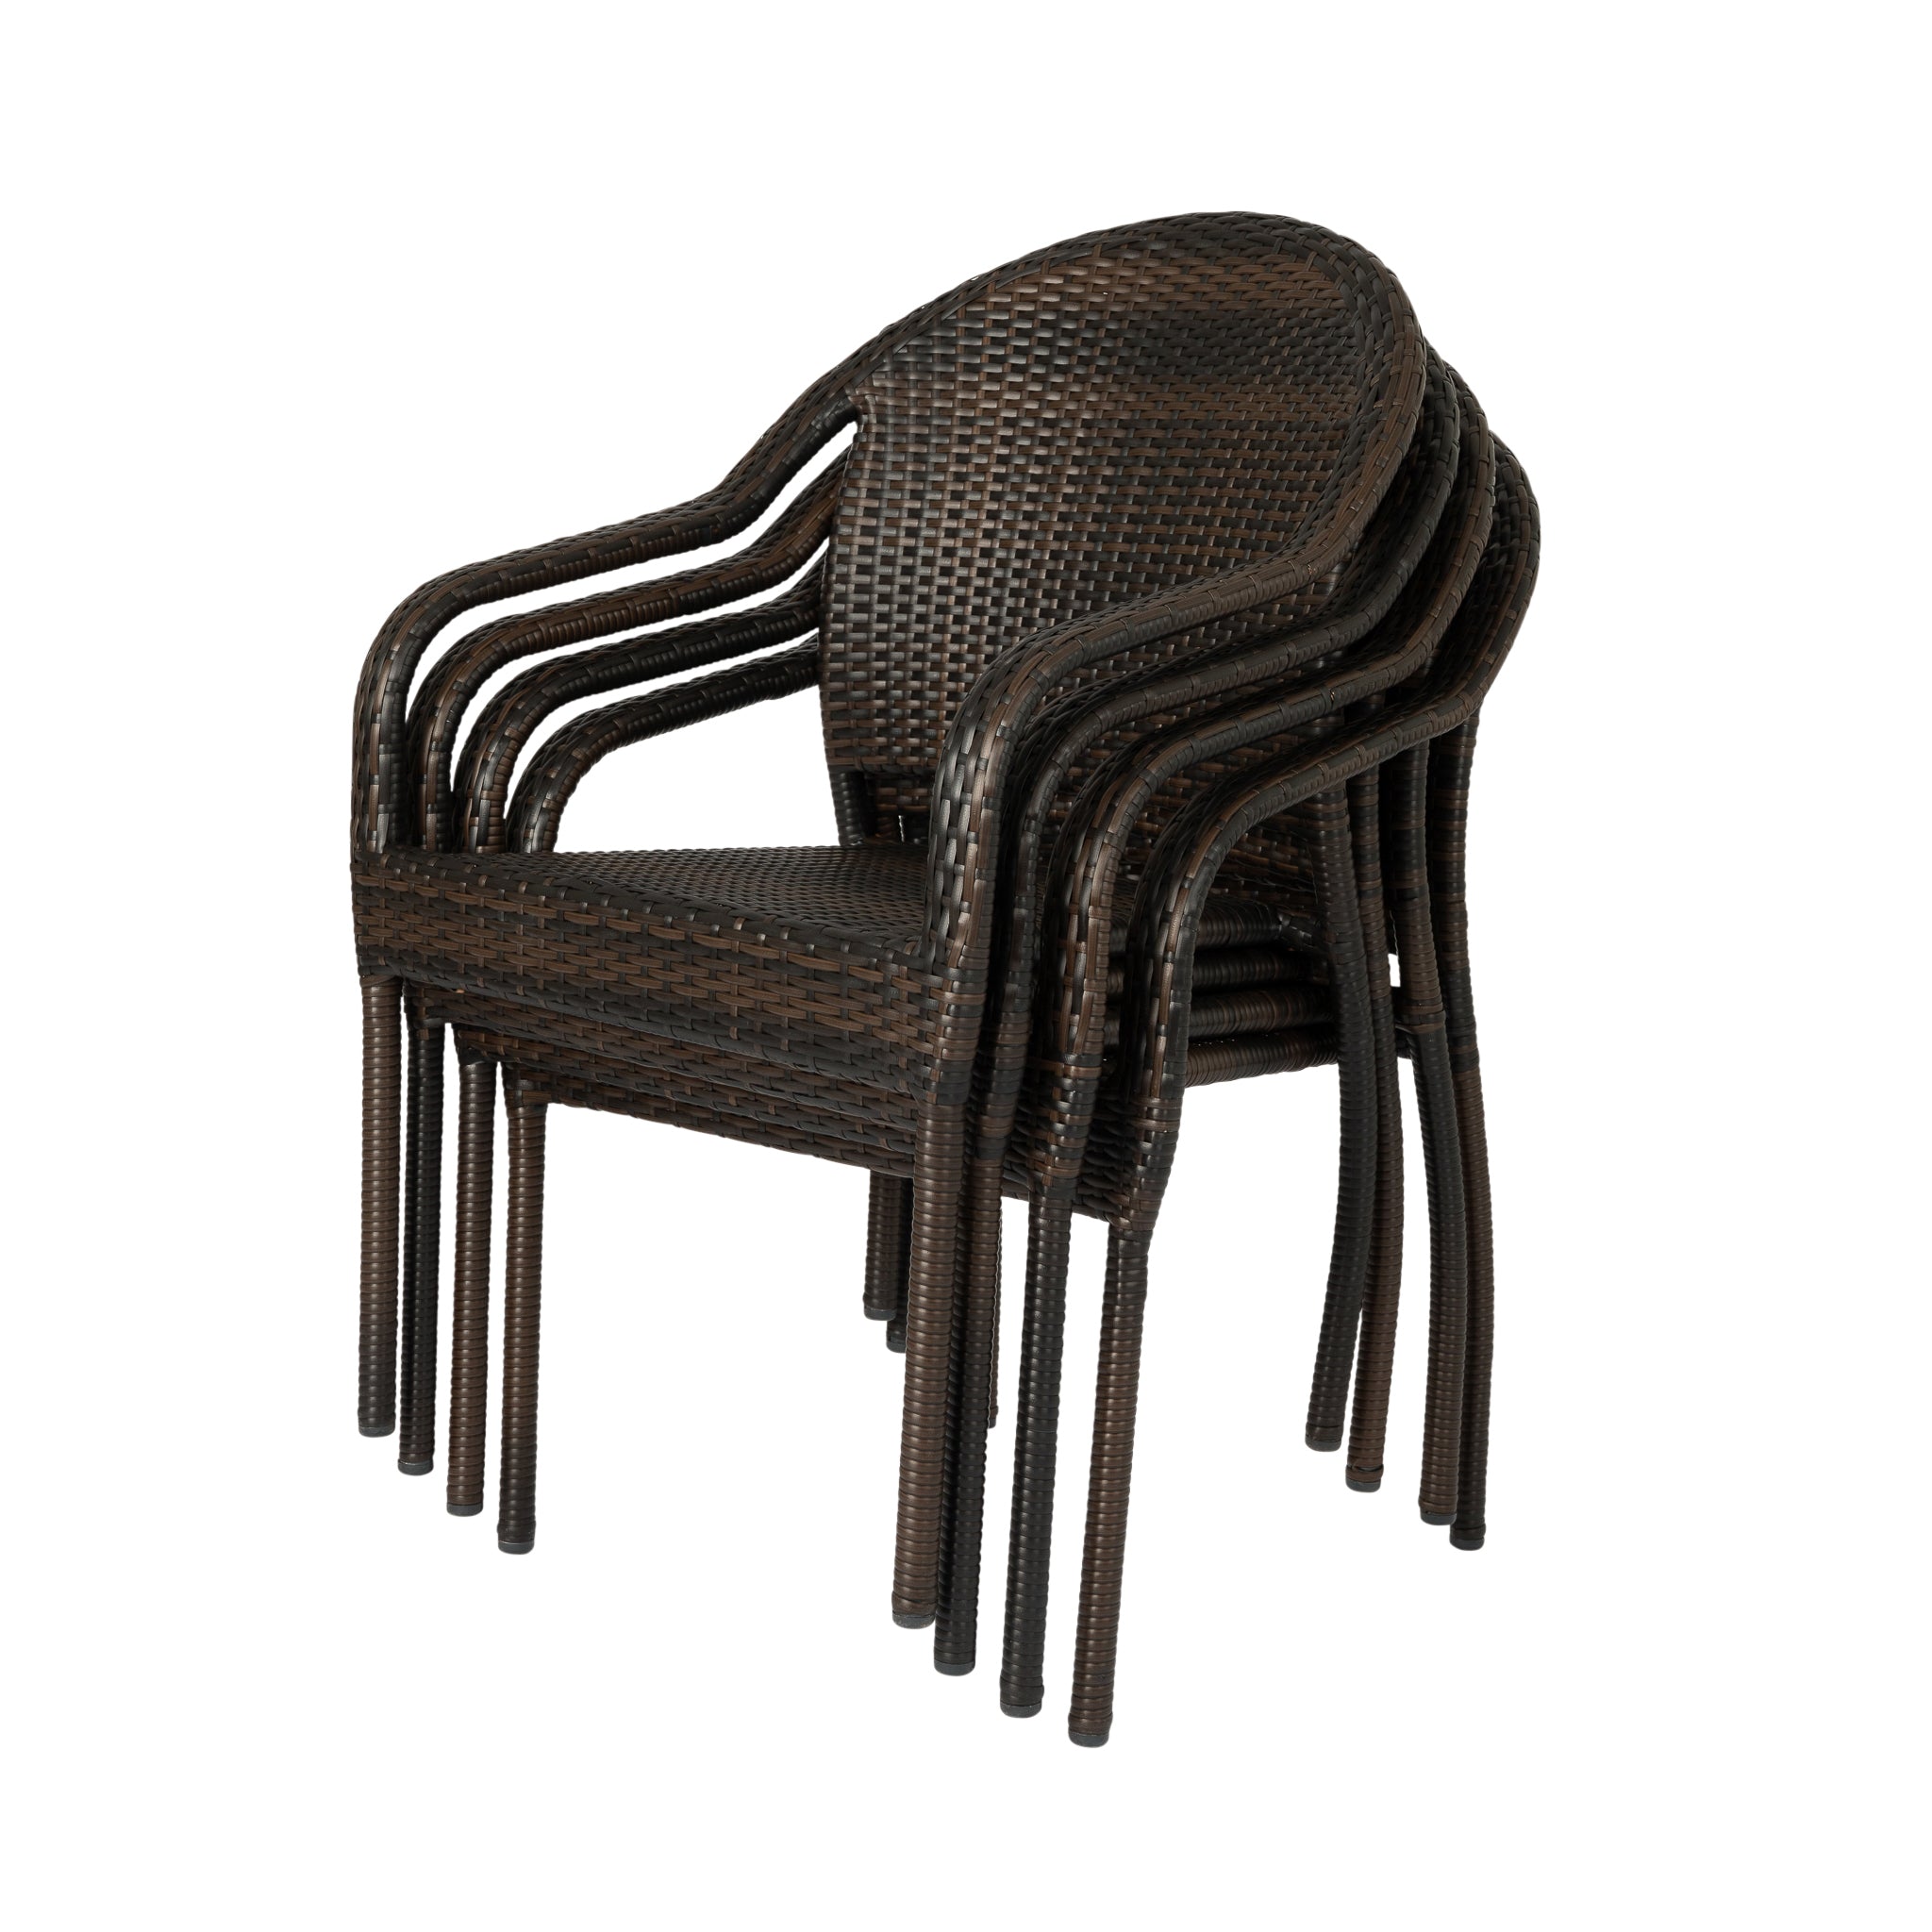 Rhodos Café 4 Stacking - in Wicker Set of Chairs All-Weather Mocha